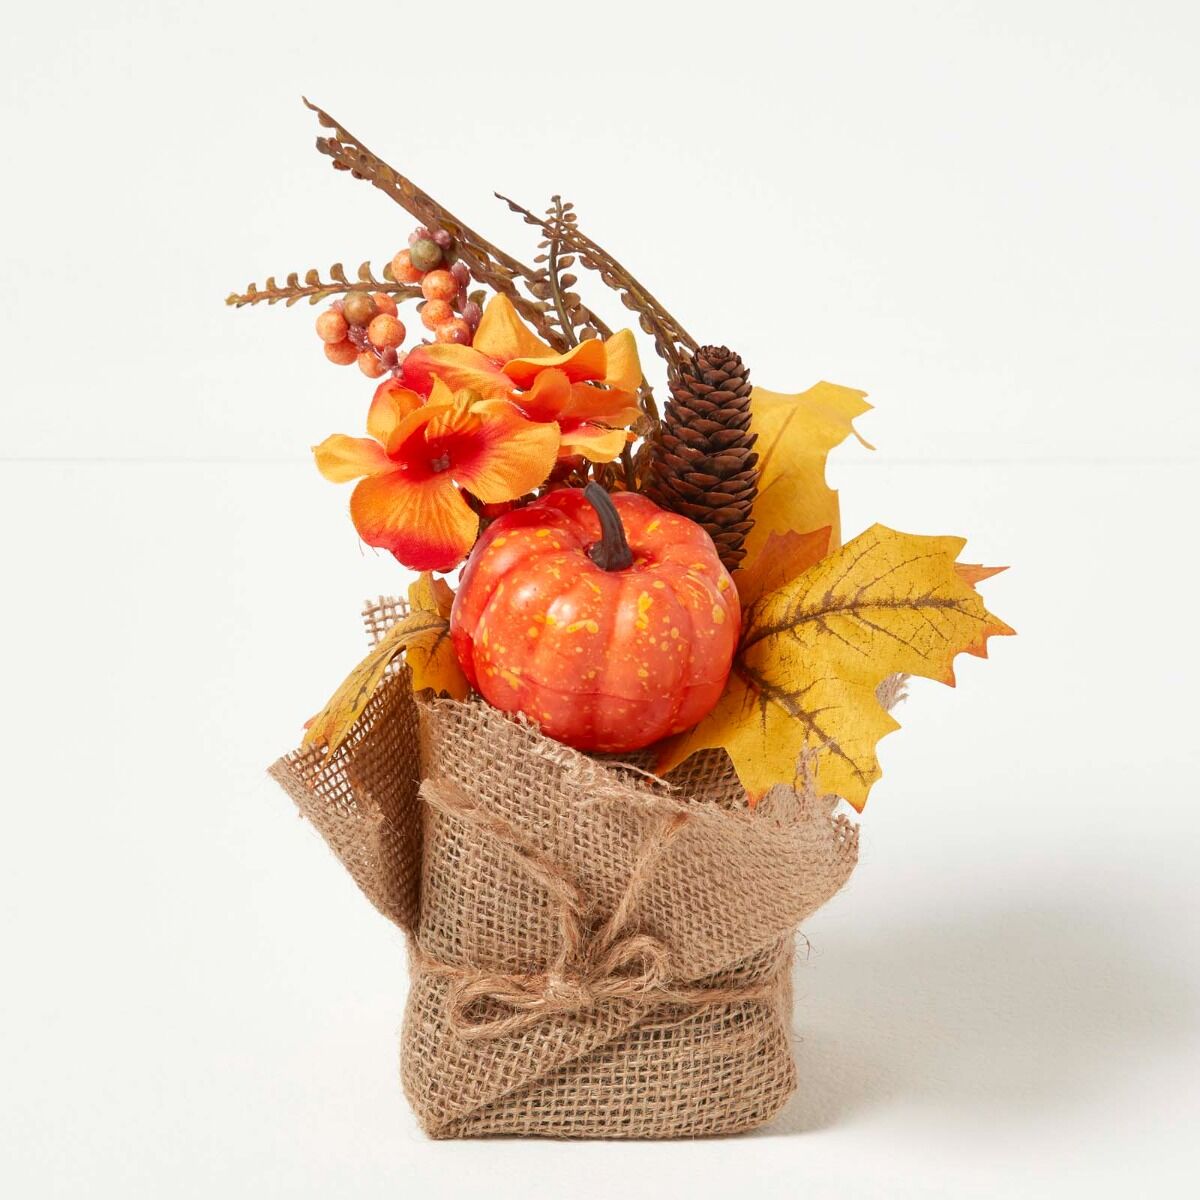 Homescapes Orange Autumn Decoration with Pumpkins and Maple Leaves, 25 cm Tall